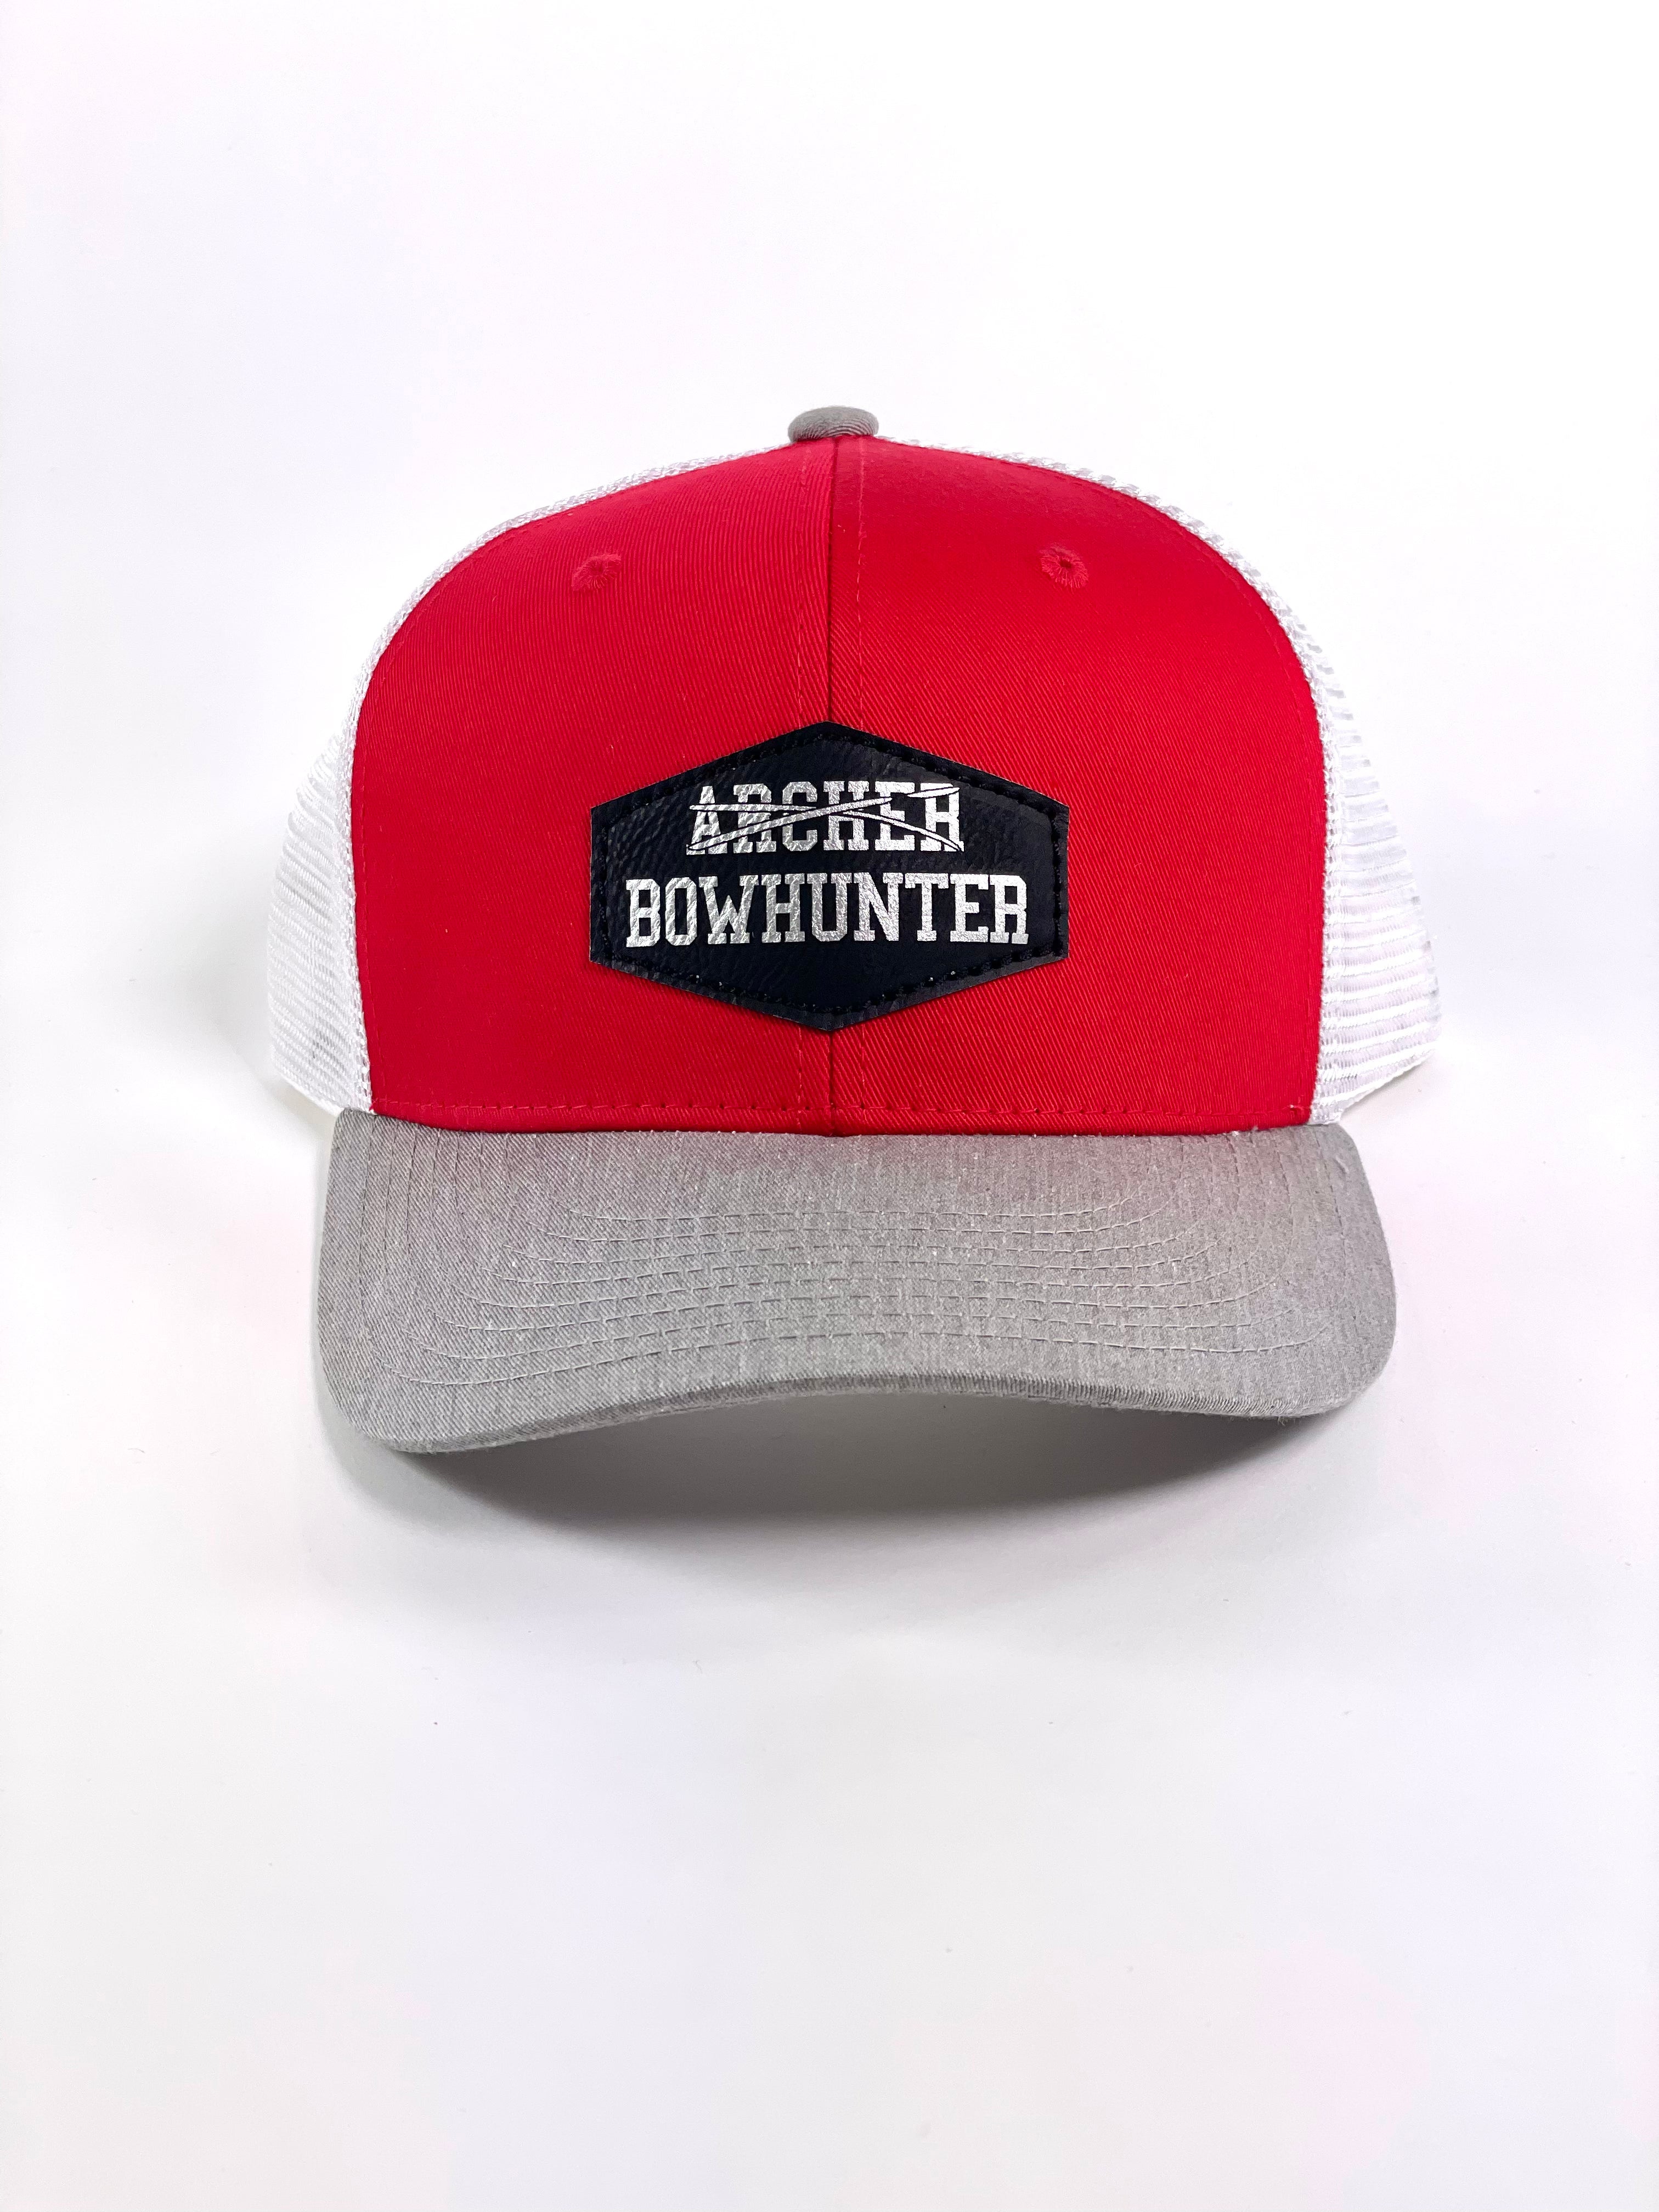 BOWHUNTER - RED/WHITE SNAP BACK HAT